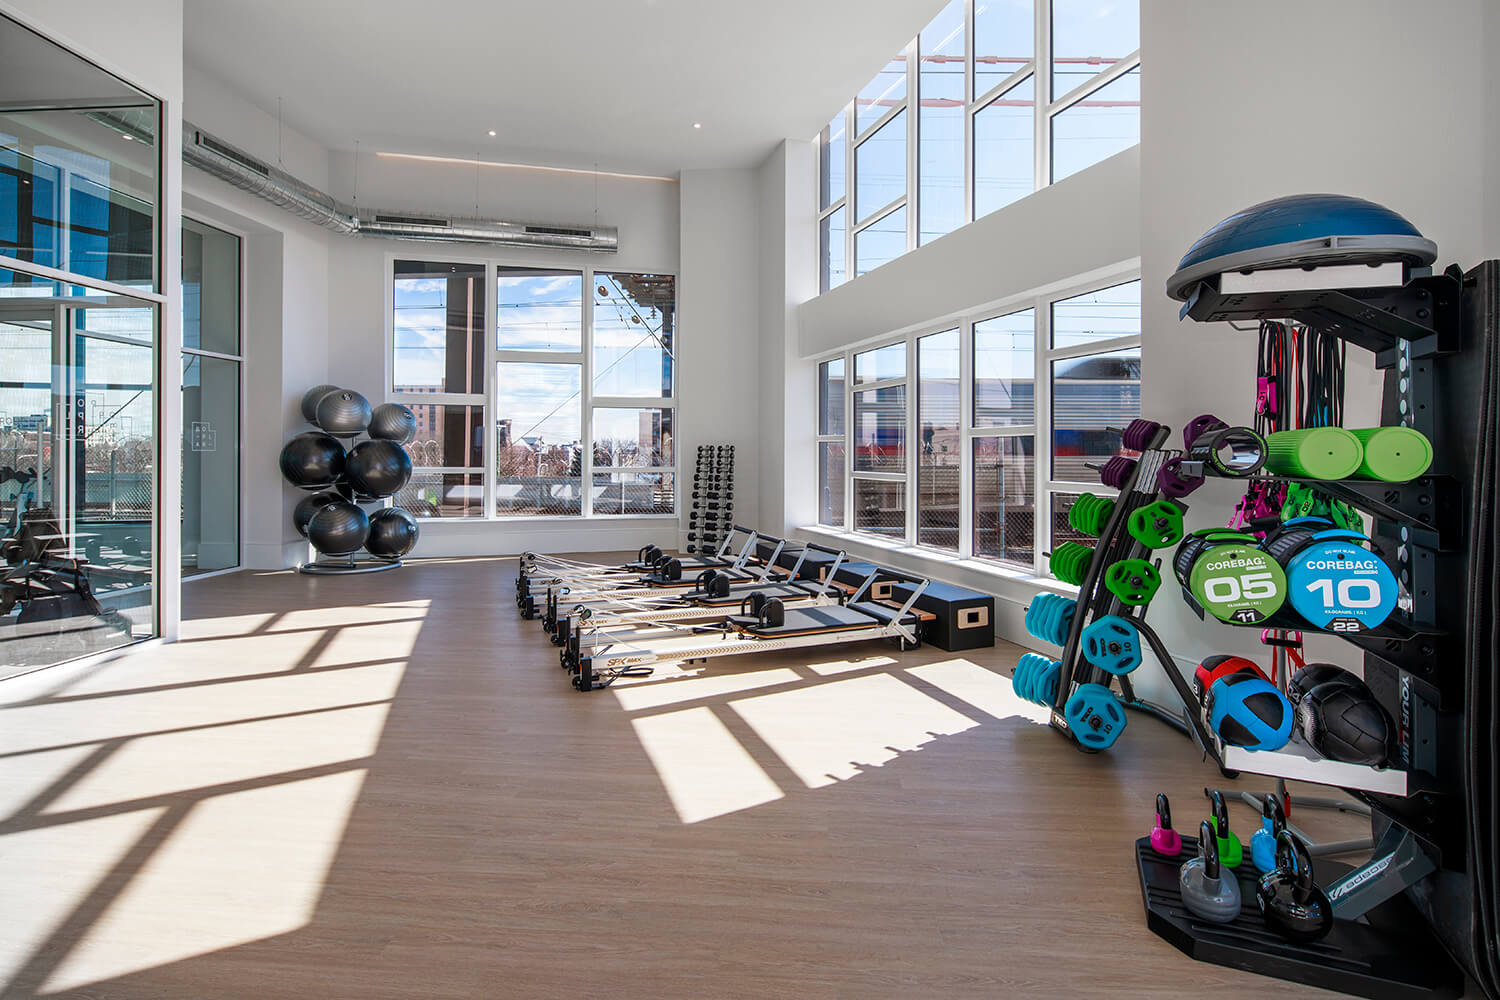 A view of the pilates machines